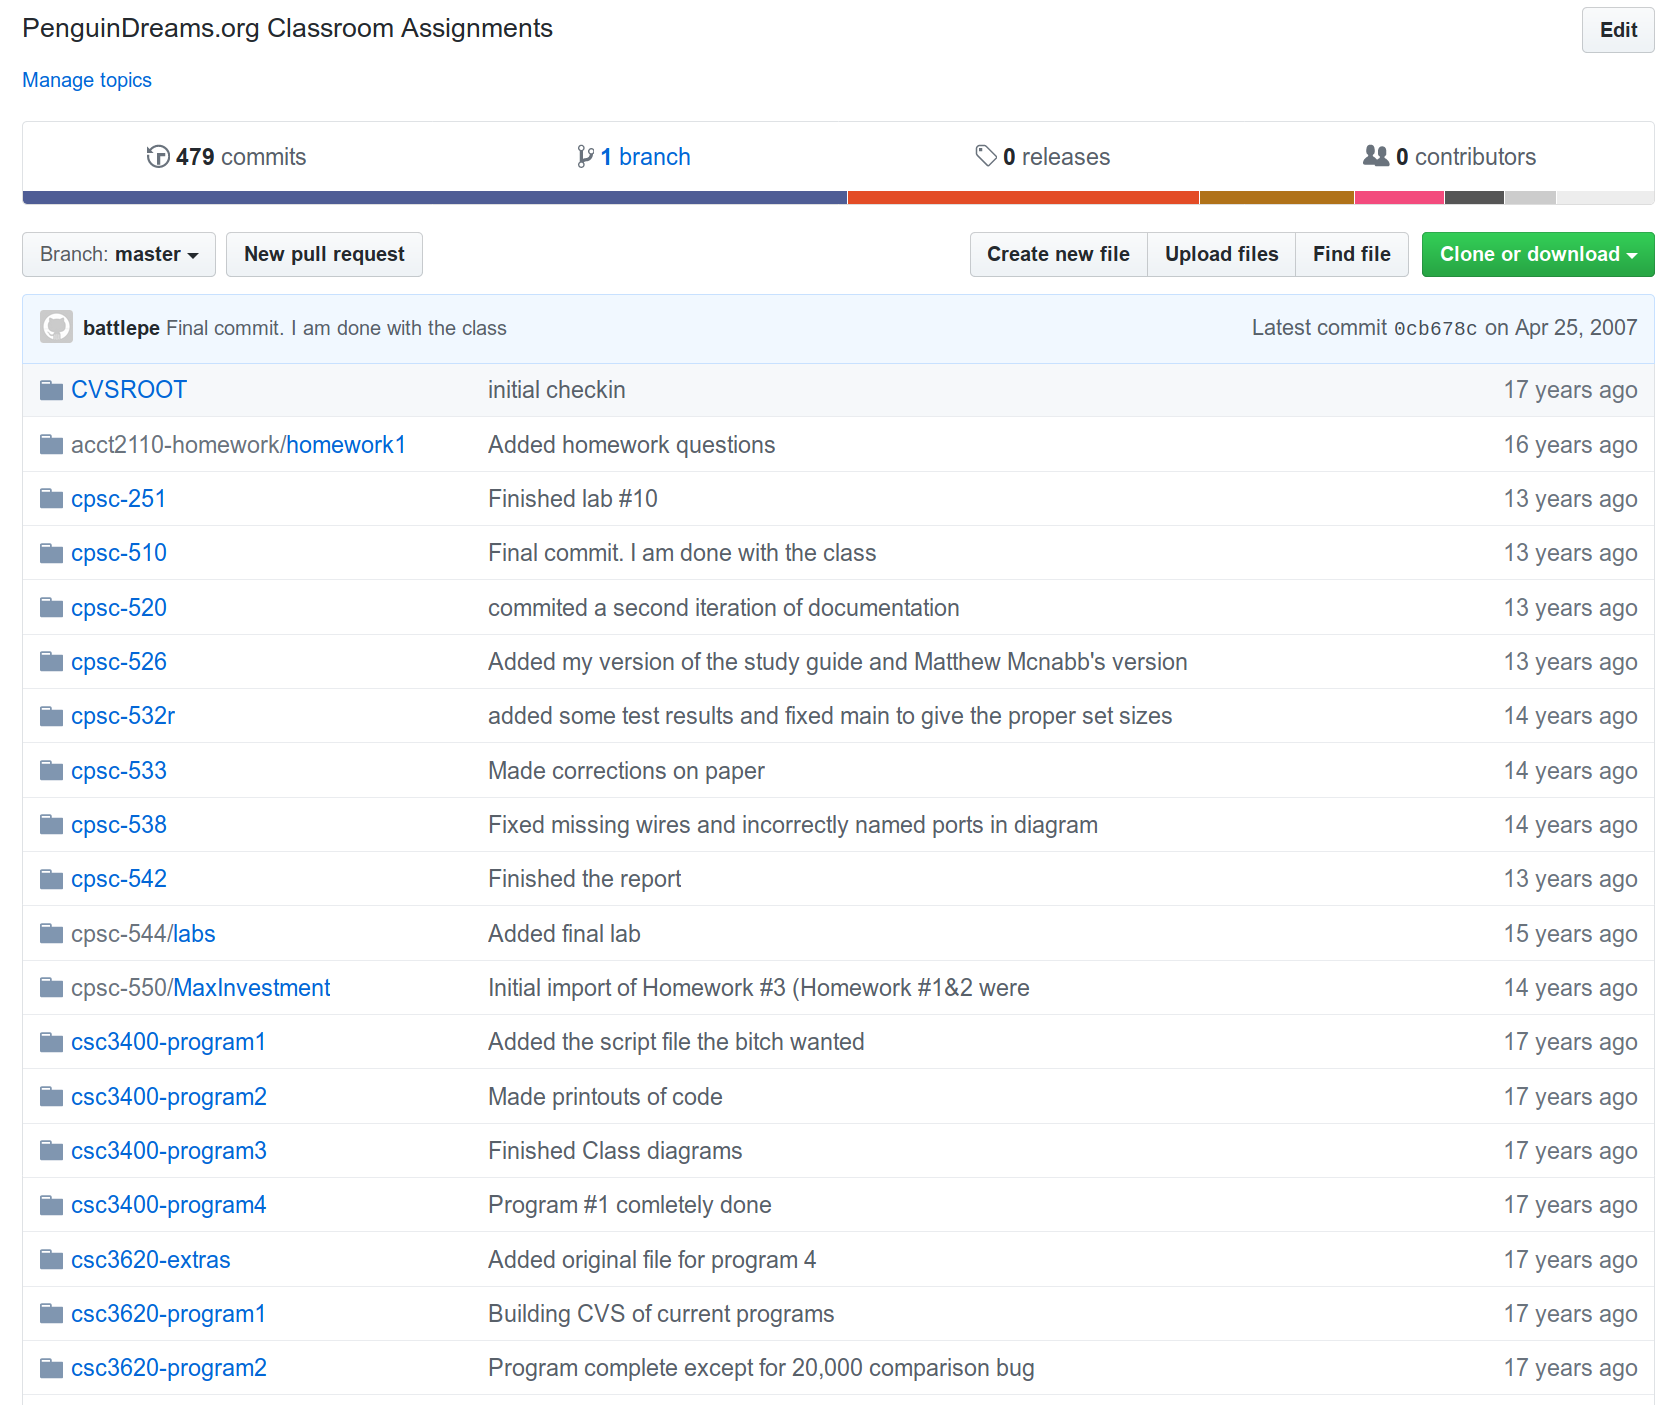 Github Repository with my Undergraduate and Graduate Class Assignments